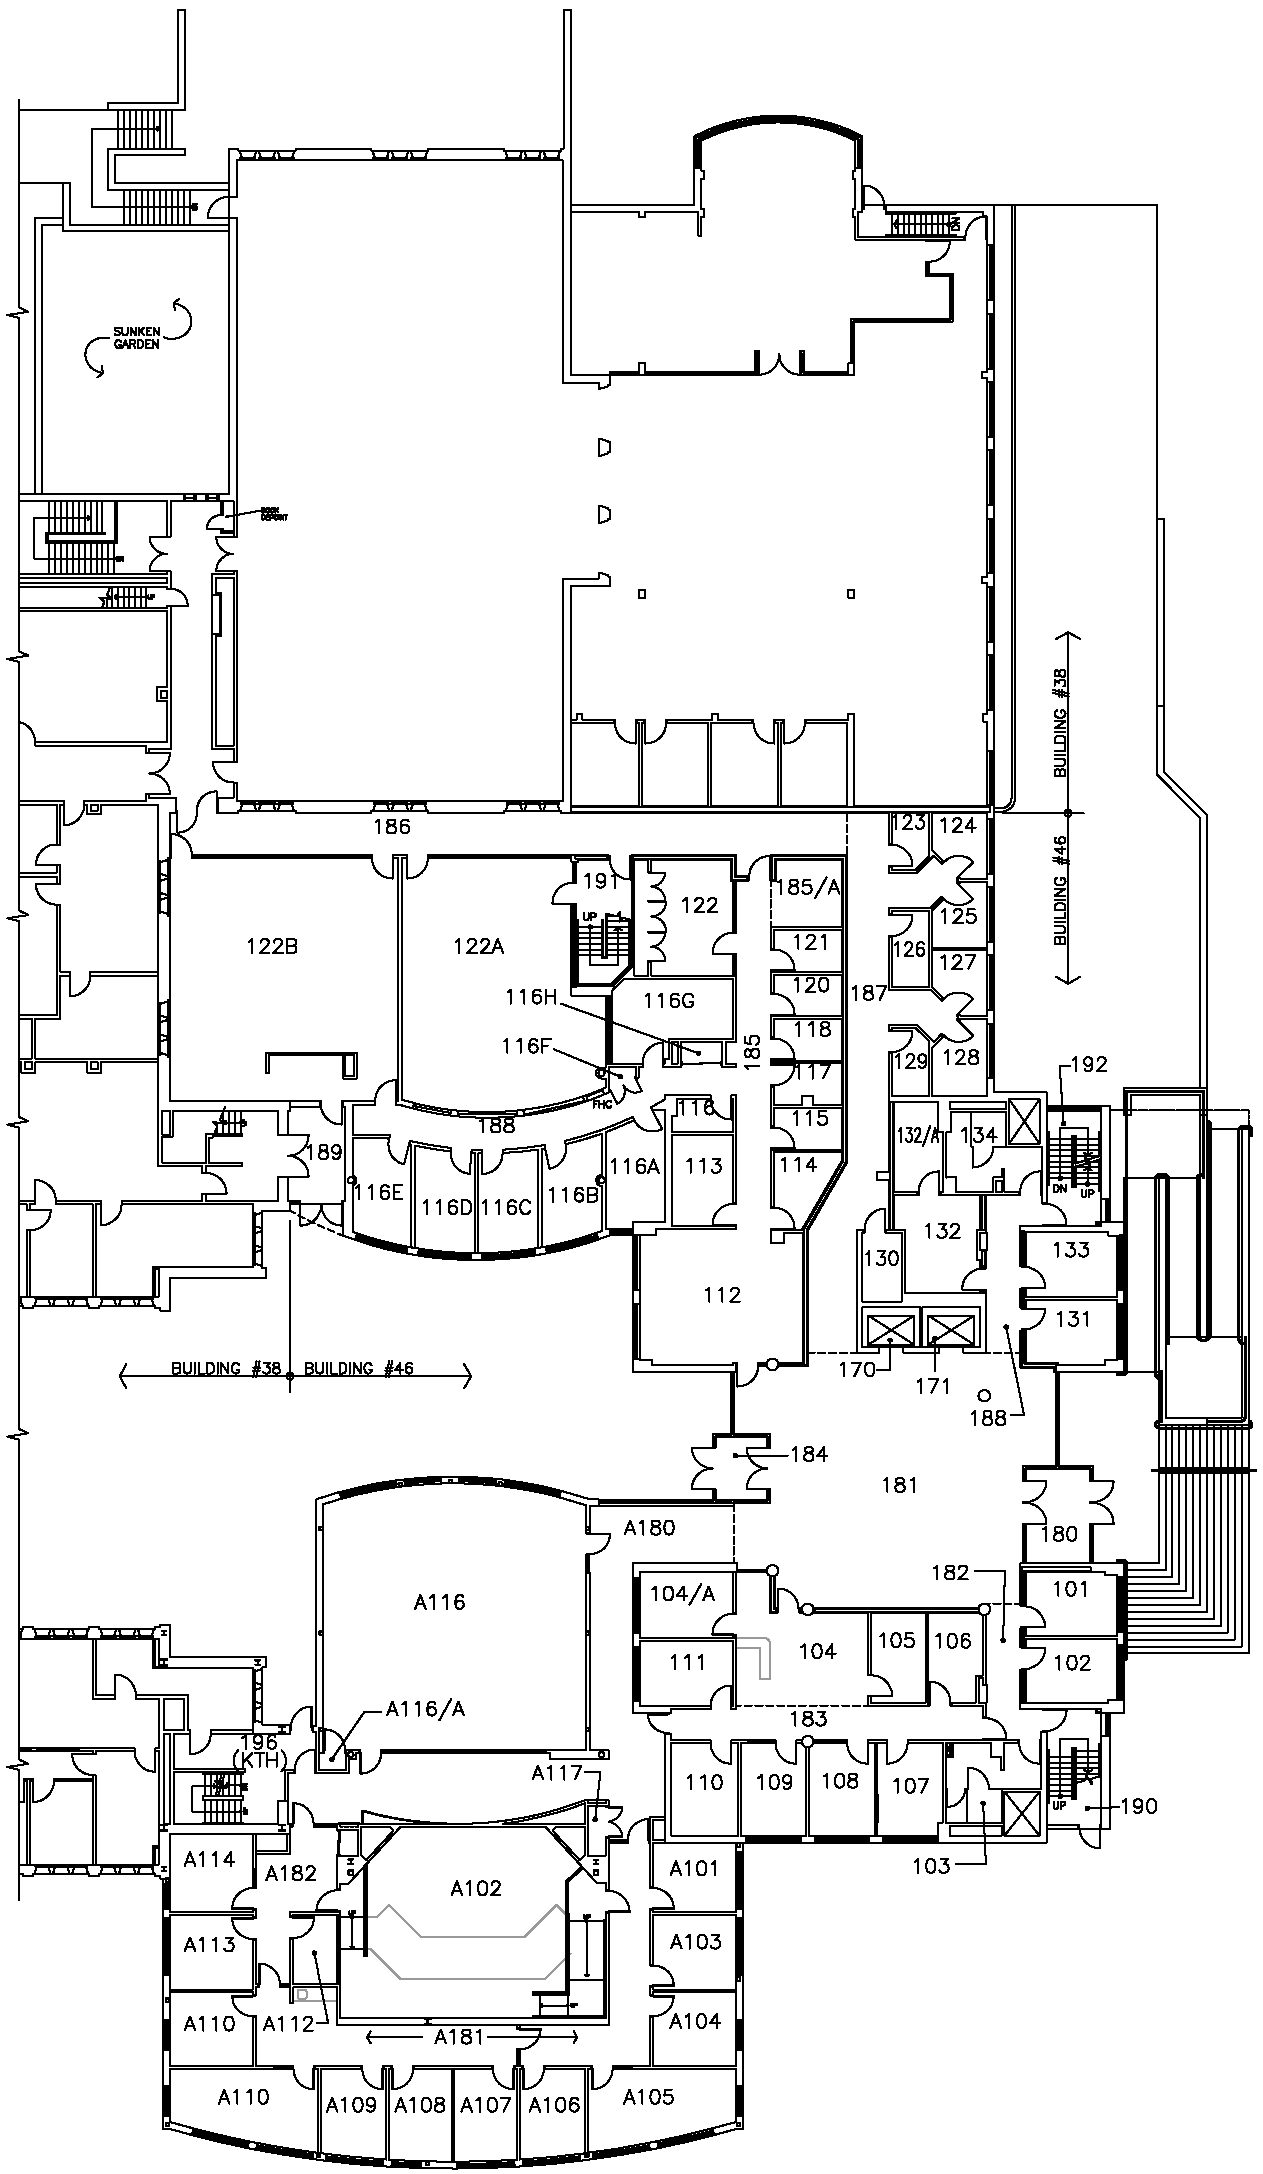 McMaster University Degroote School Of Business (DSB) - First Floor Map